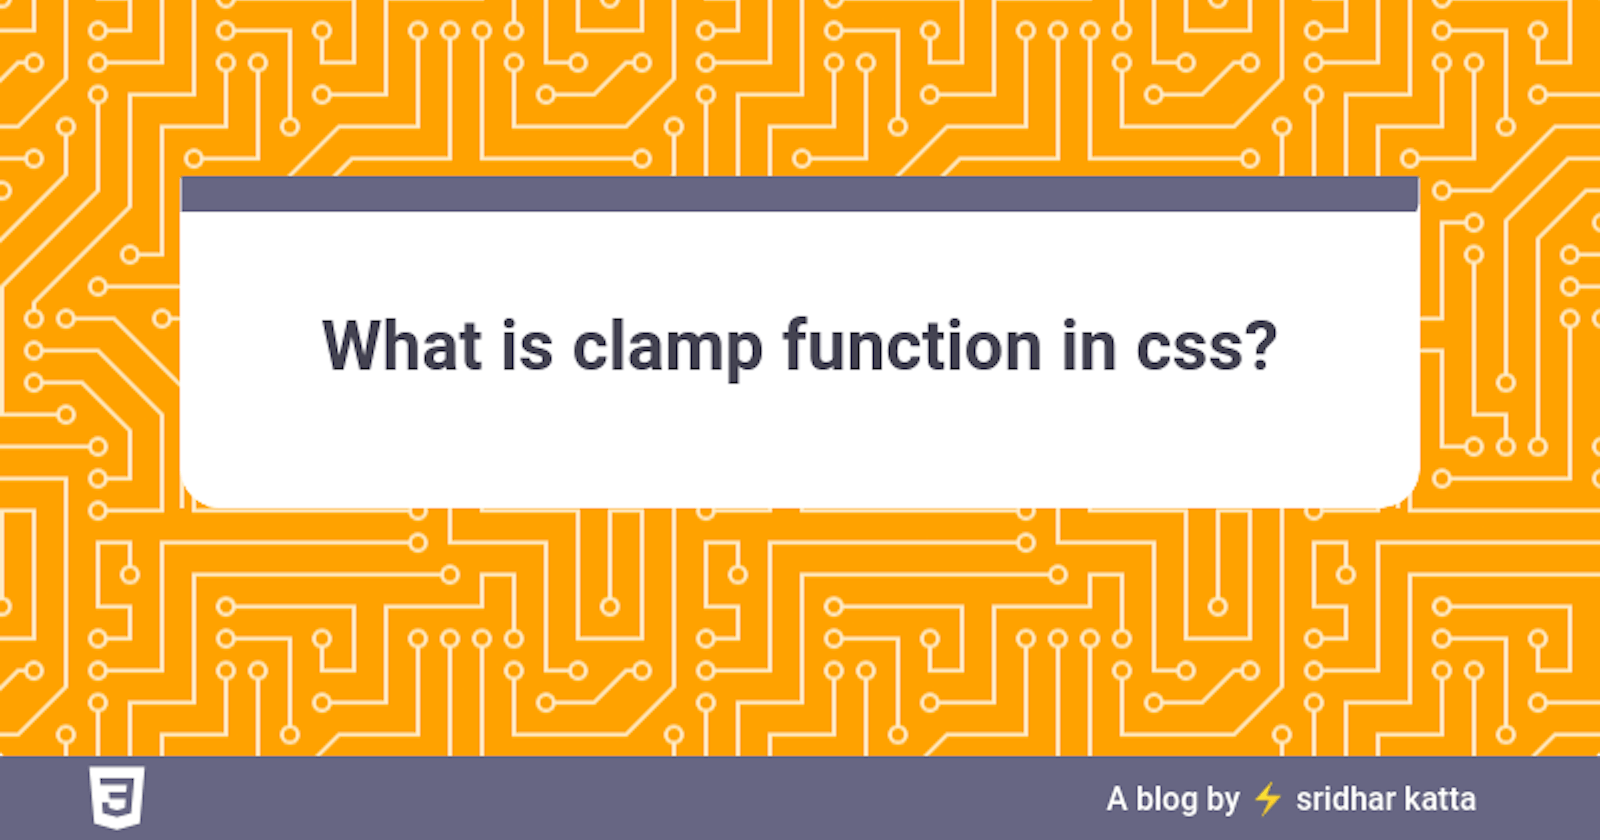 What is clamp function in CSS?